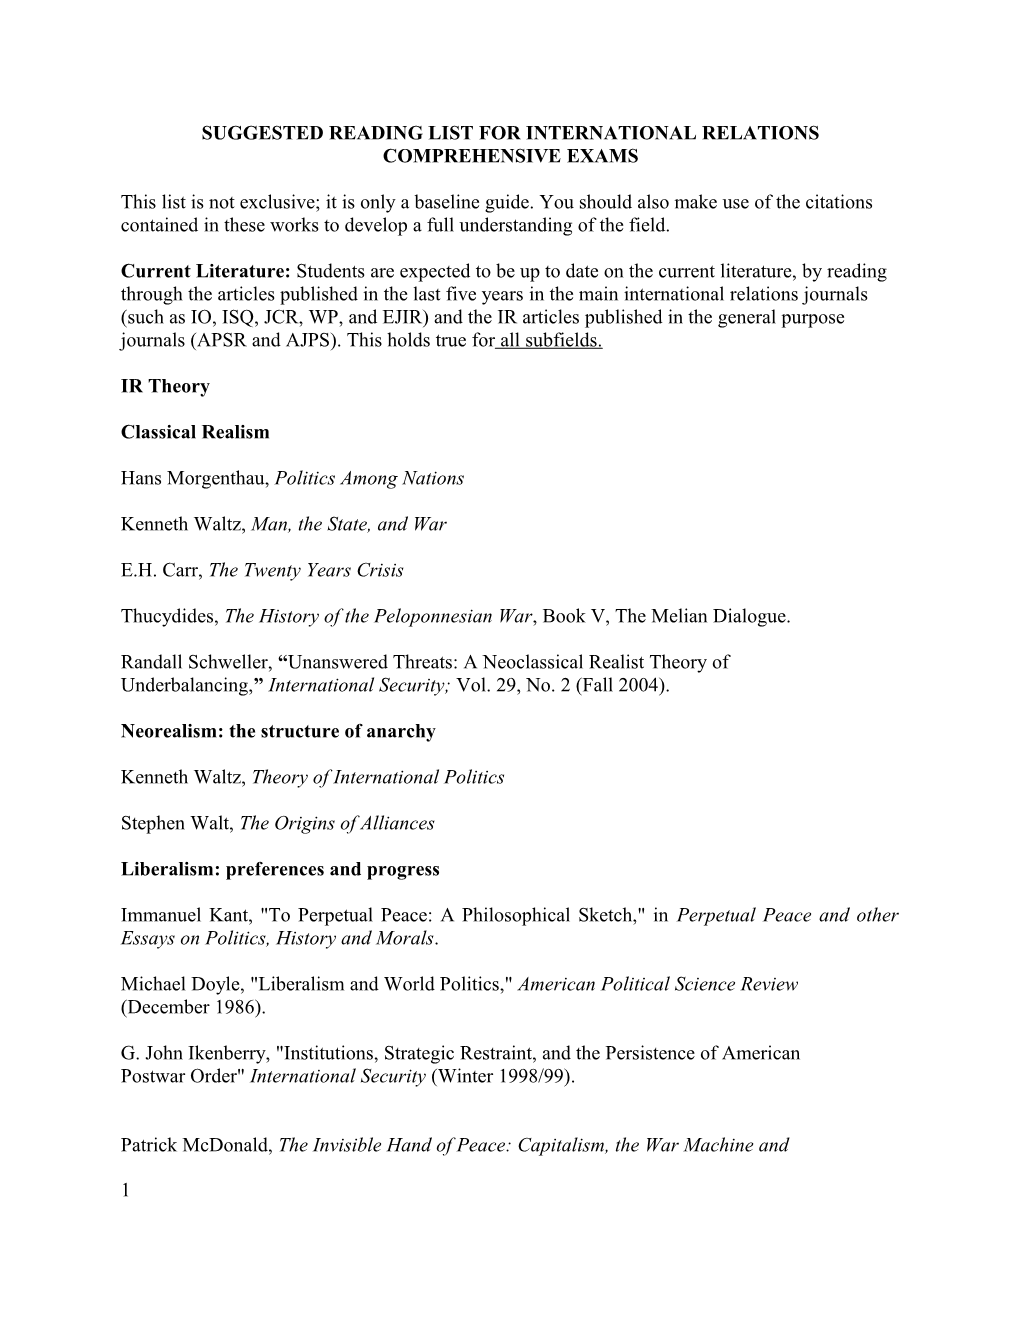 Suggested Reading List for International Relations Comprehensive Exams